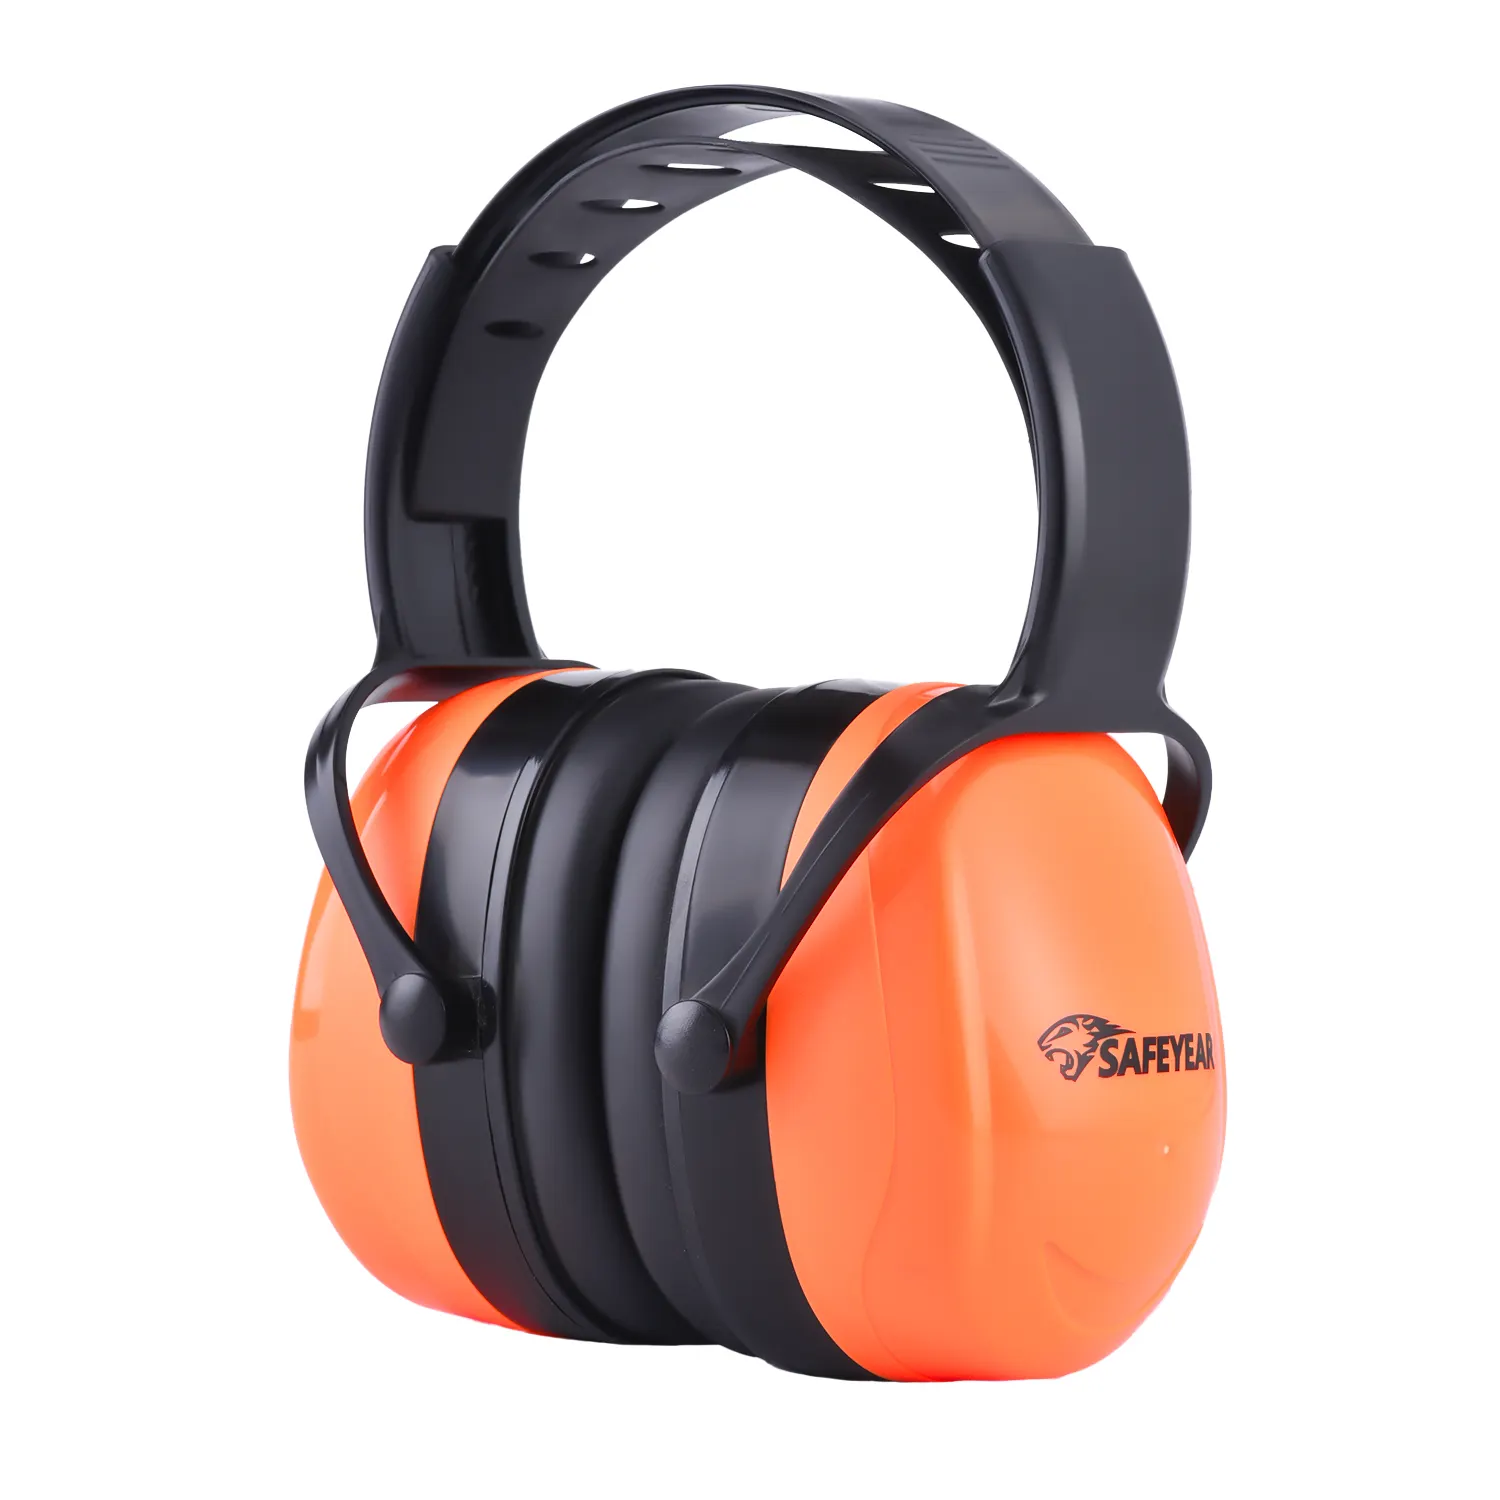 SAFEYEAR ABS material earmuff comfortable sponges ear protection